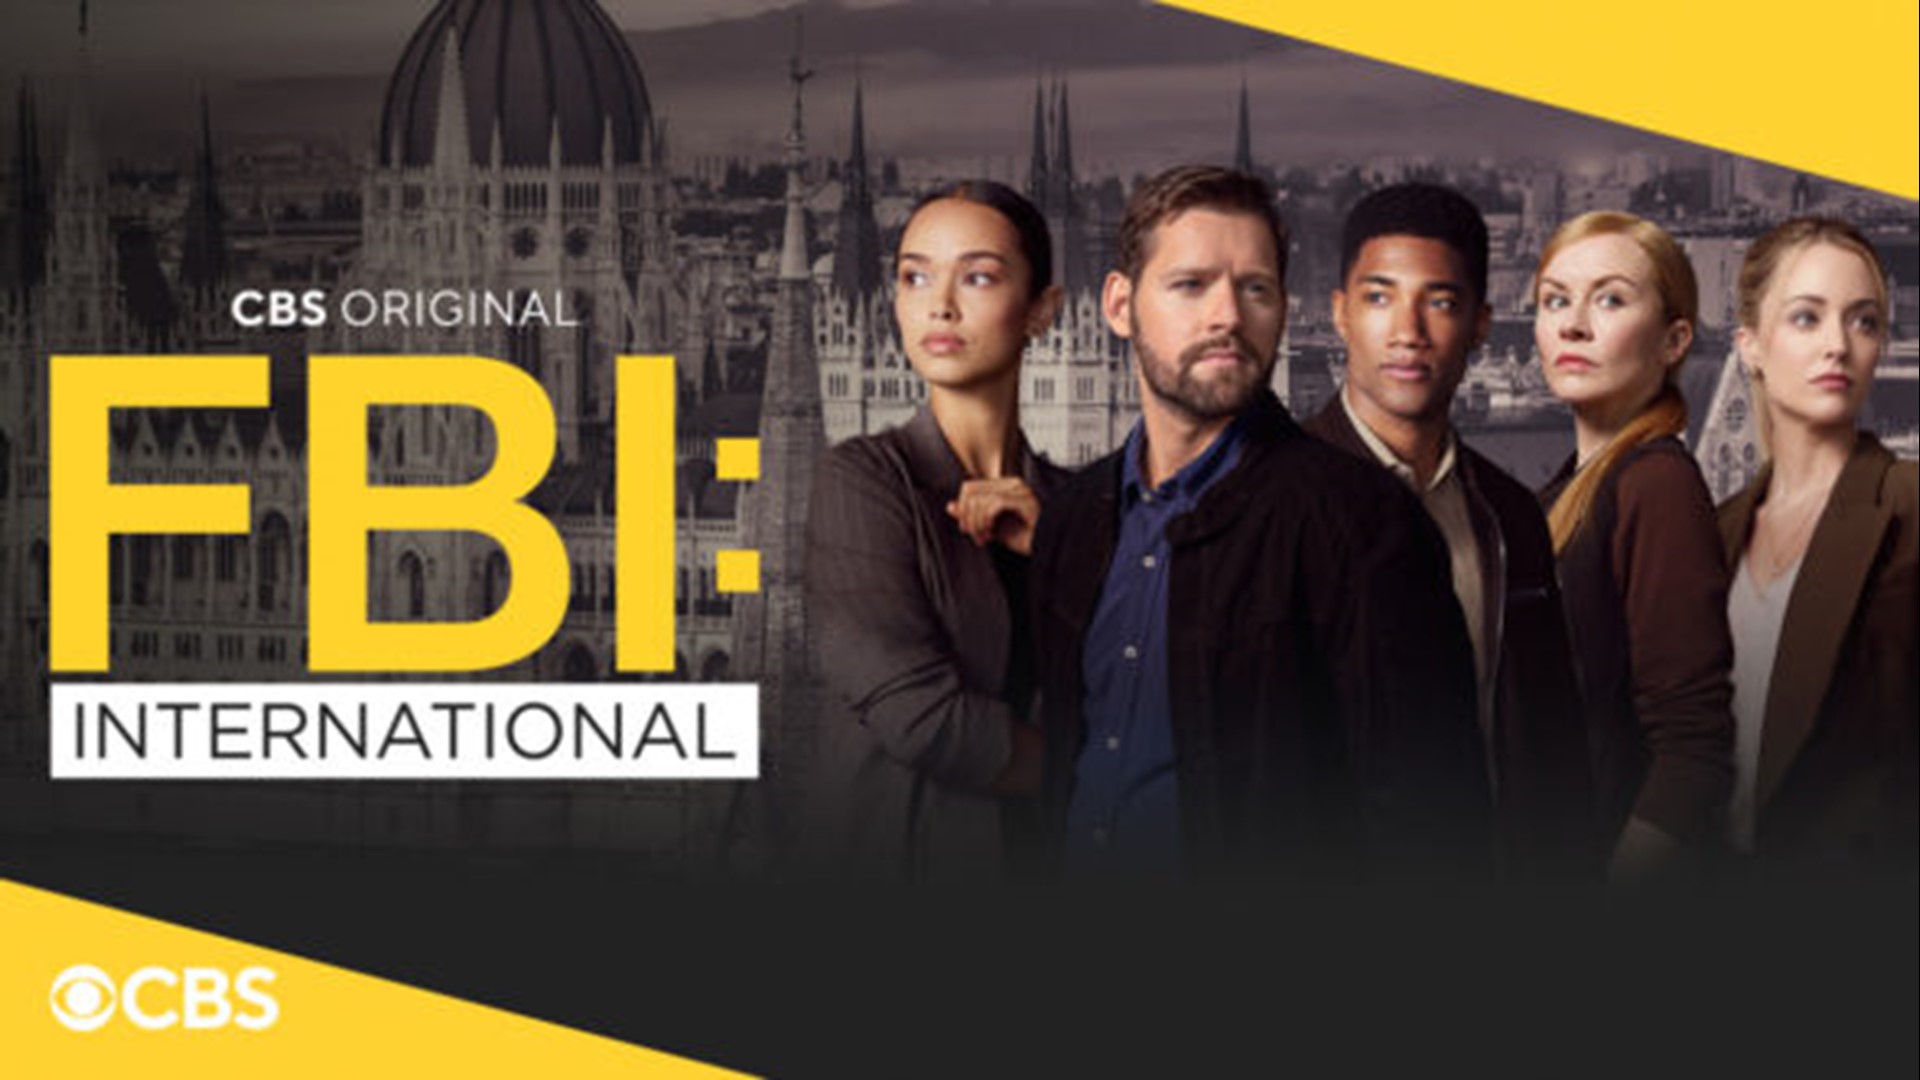 Kristen chats with 'FBI: International' stars Luke Kleintank and Christina Wolfe about the new season! You can catch new episodes on Tuesdays at 9 pm on WUSA9.